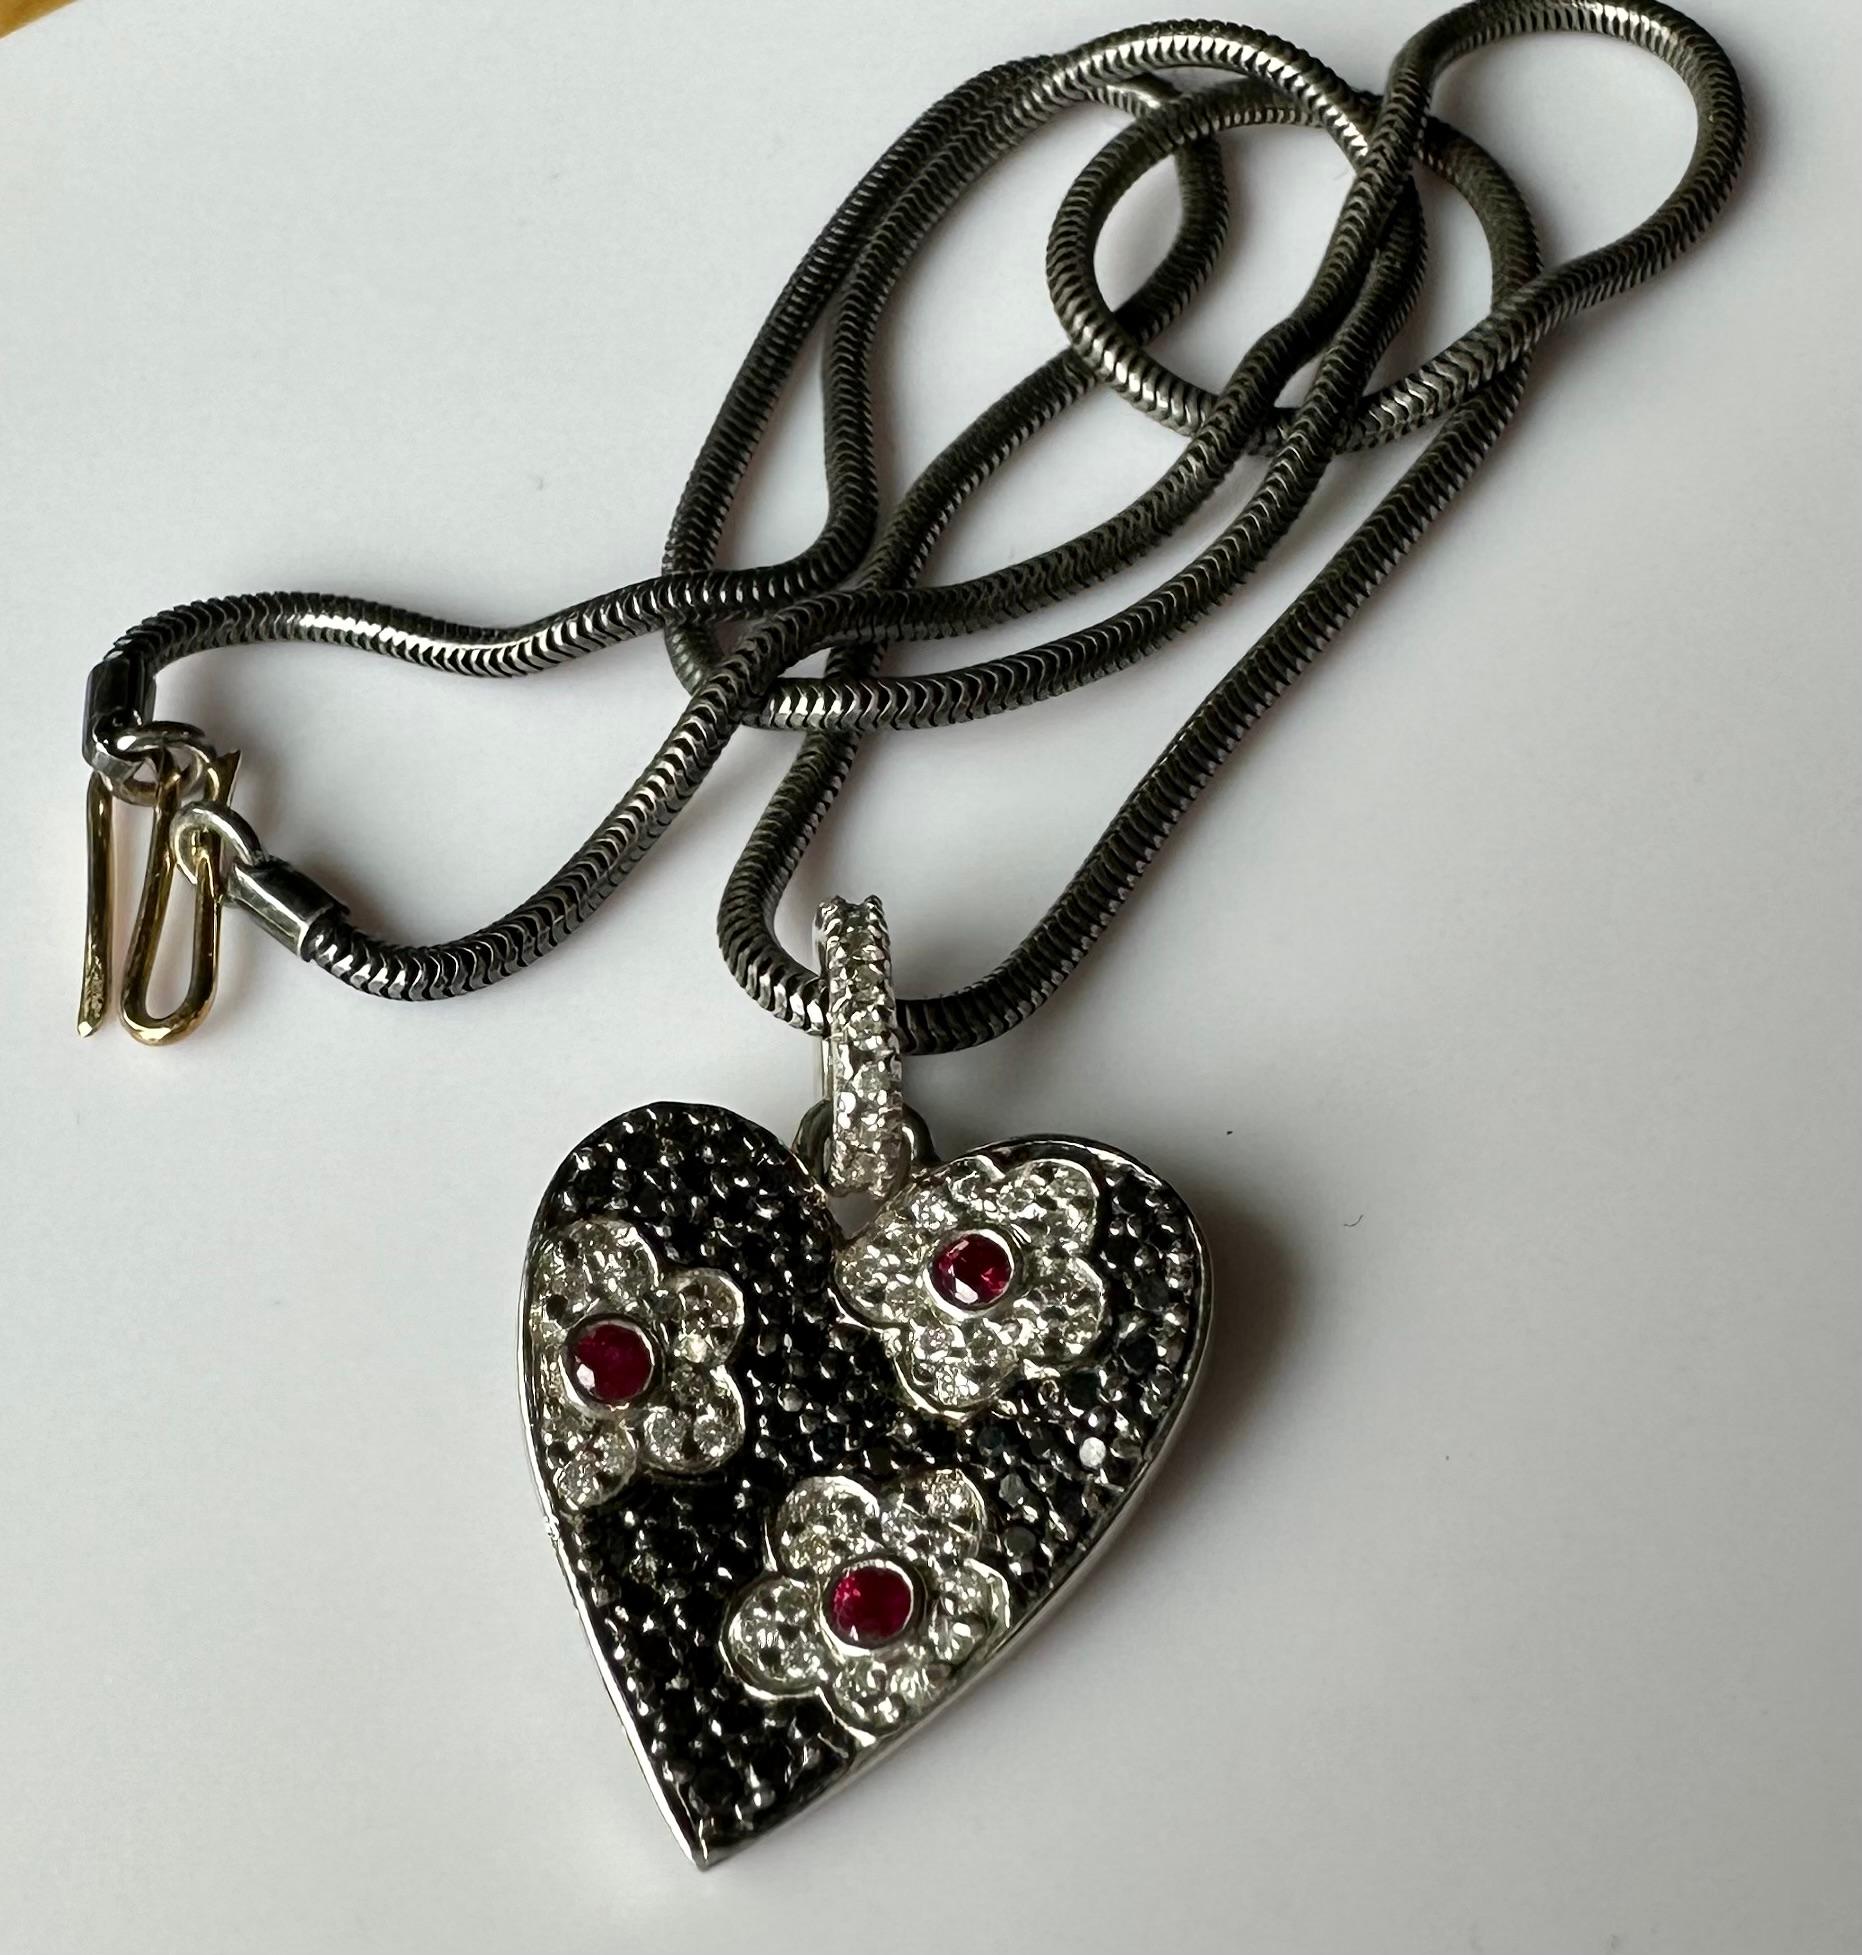 An 18kt White Gold Pendant set with Rubies & Diamonds.
This lovely 18kt White Gold Heart Pendant is pave set with 3 small accent Rubies and many Black and White Diamonds. The Pendant’s bail is channel set with tiny white diamonds adding a lovely